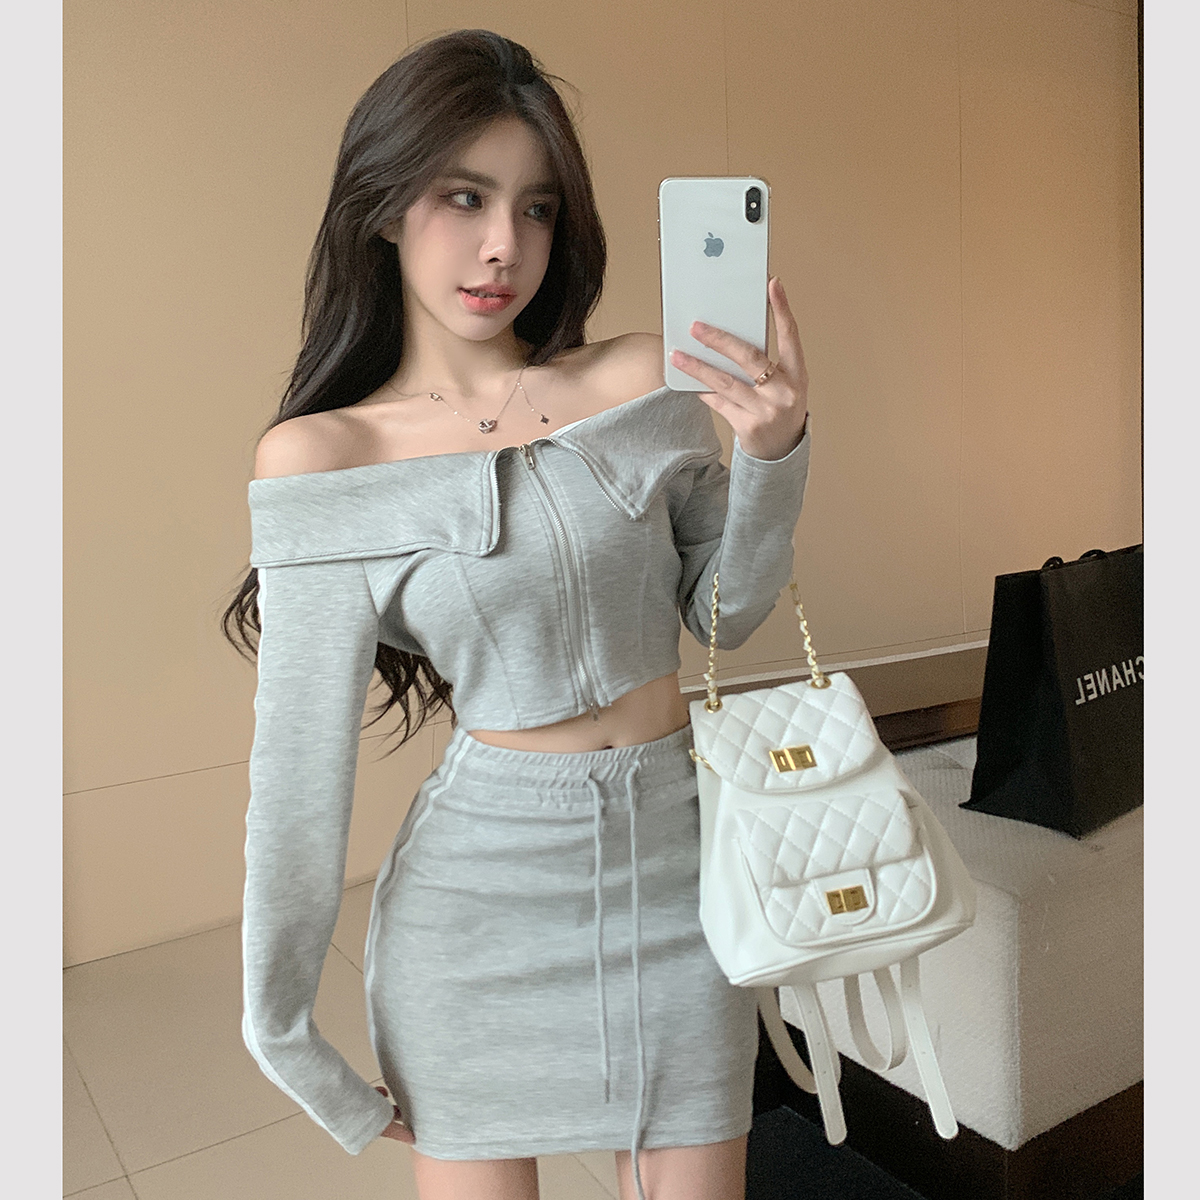 One-shoulder sports and leisure college suit all-match American style bag hip hot girl skirt drawstring two-piece set